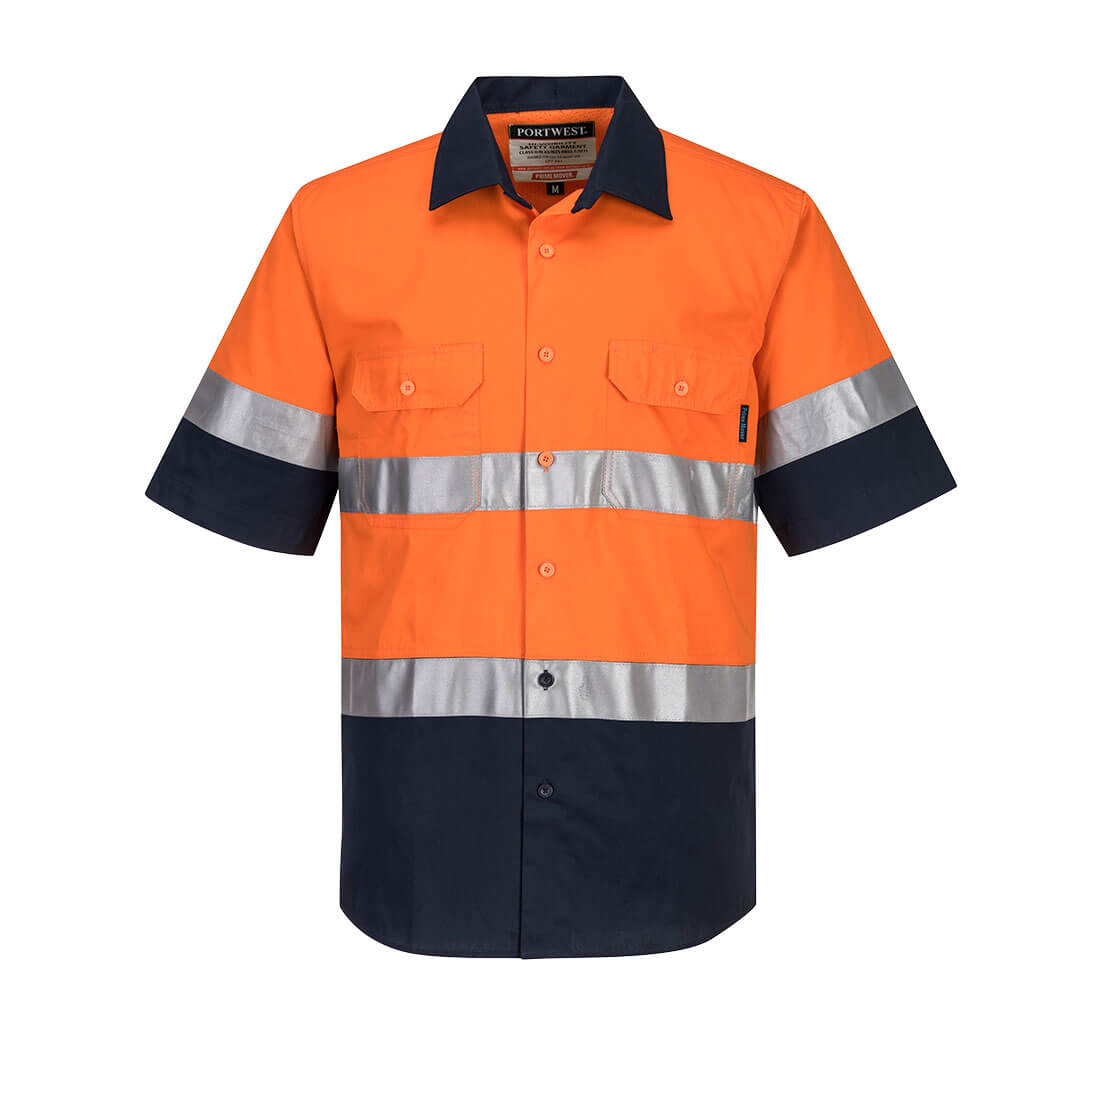 Hi-Vis Two Tone Lightweight Short Sleeve Shirt with Tape